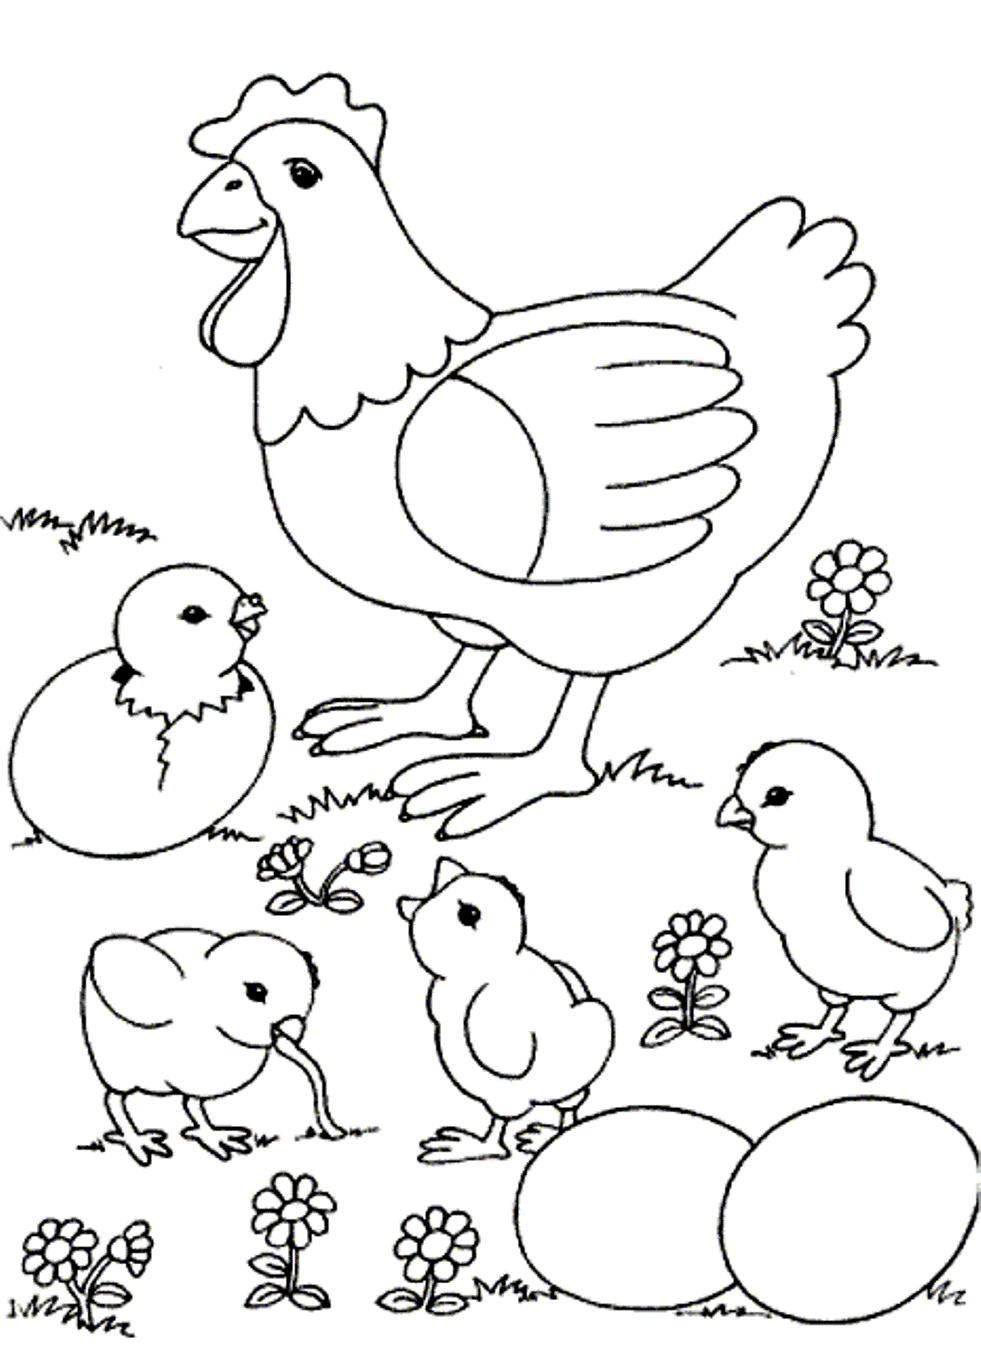 Chicks And Chicken Farm Animal S8fdb Coloring Page